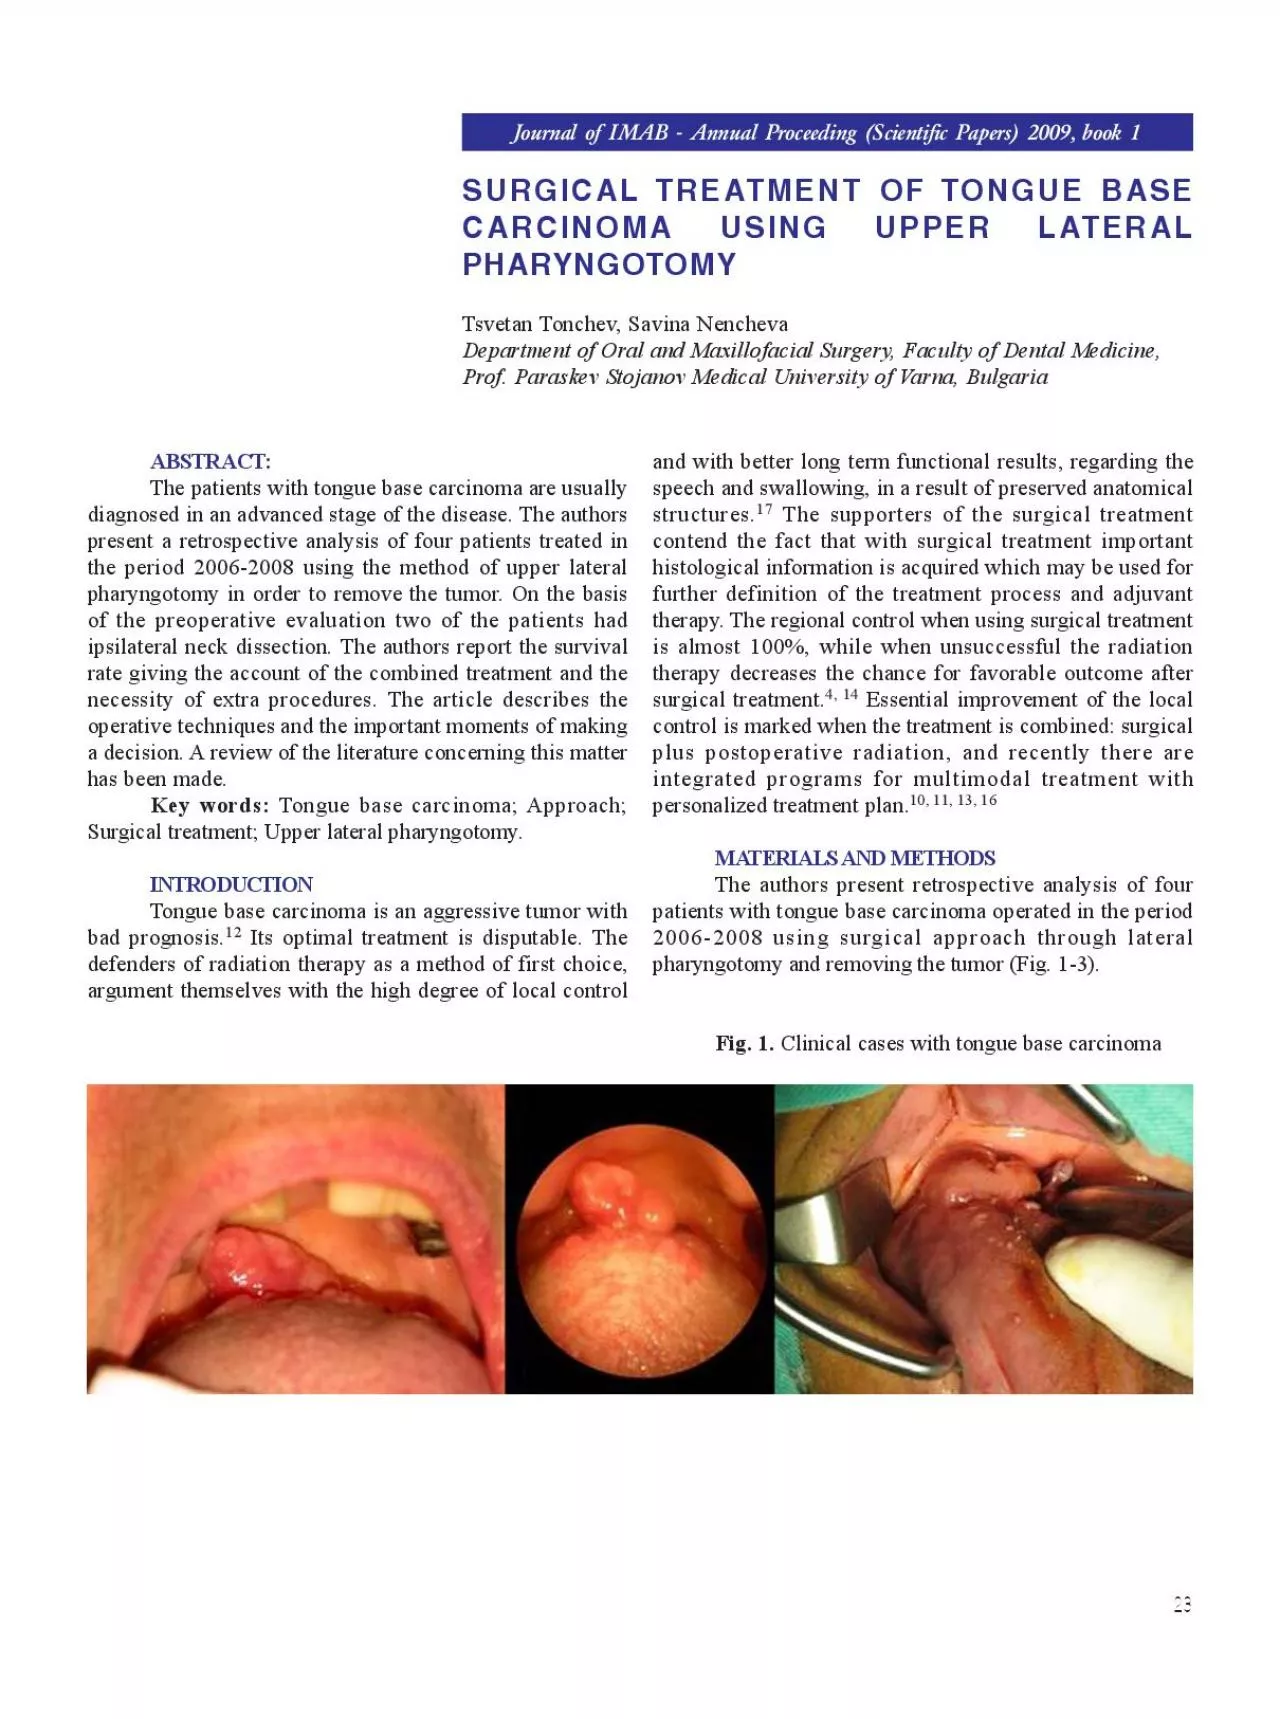 SURGICAL TREATMENT OF TONGUE BASECARCINOMA USING UPPER LATERALPHARYNGO